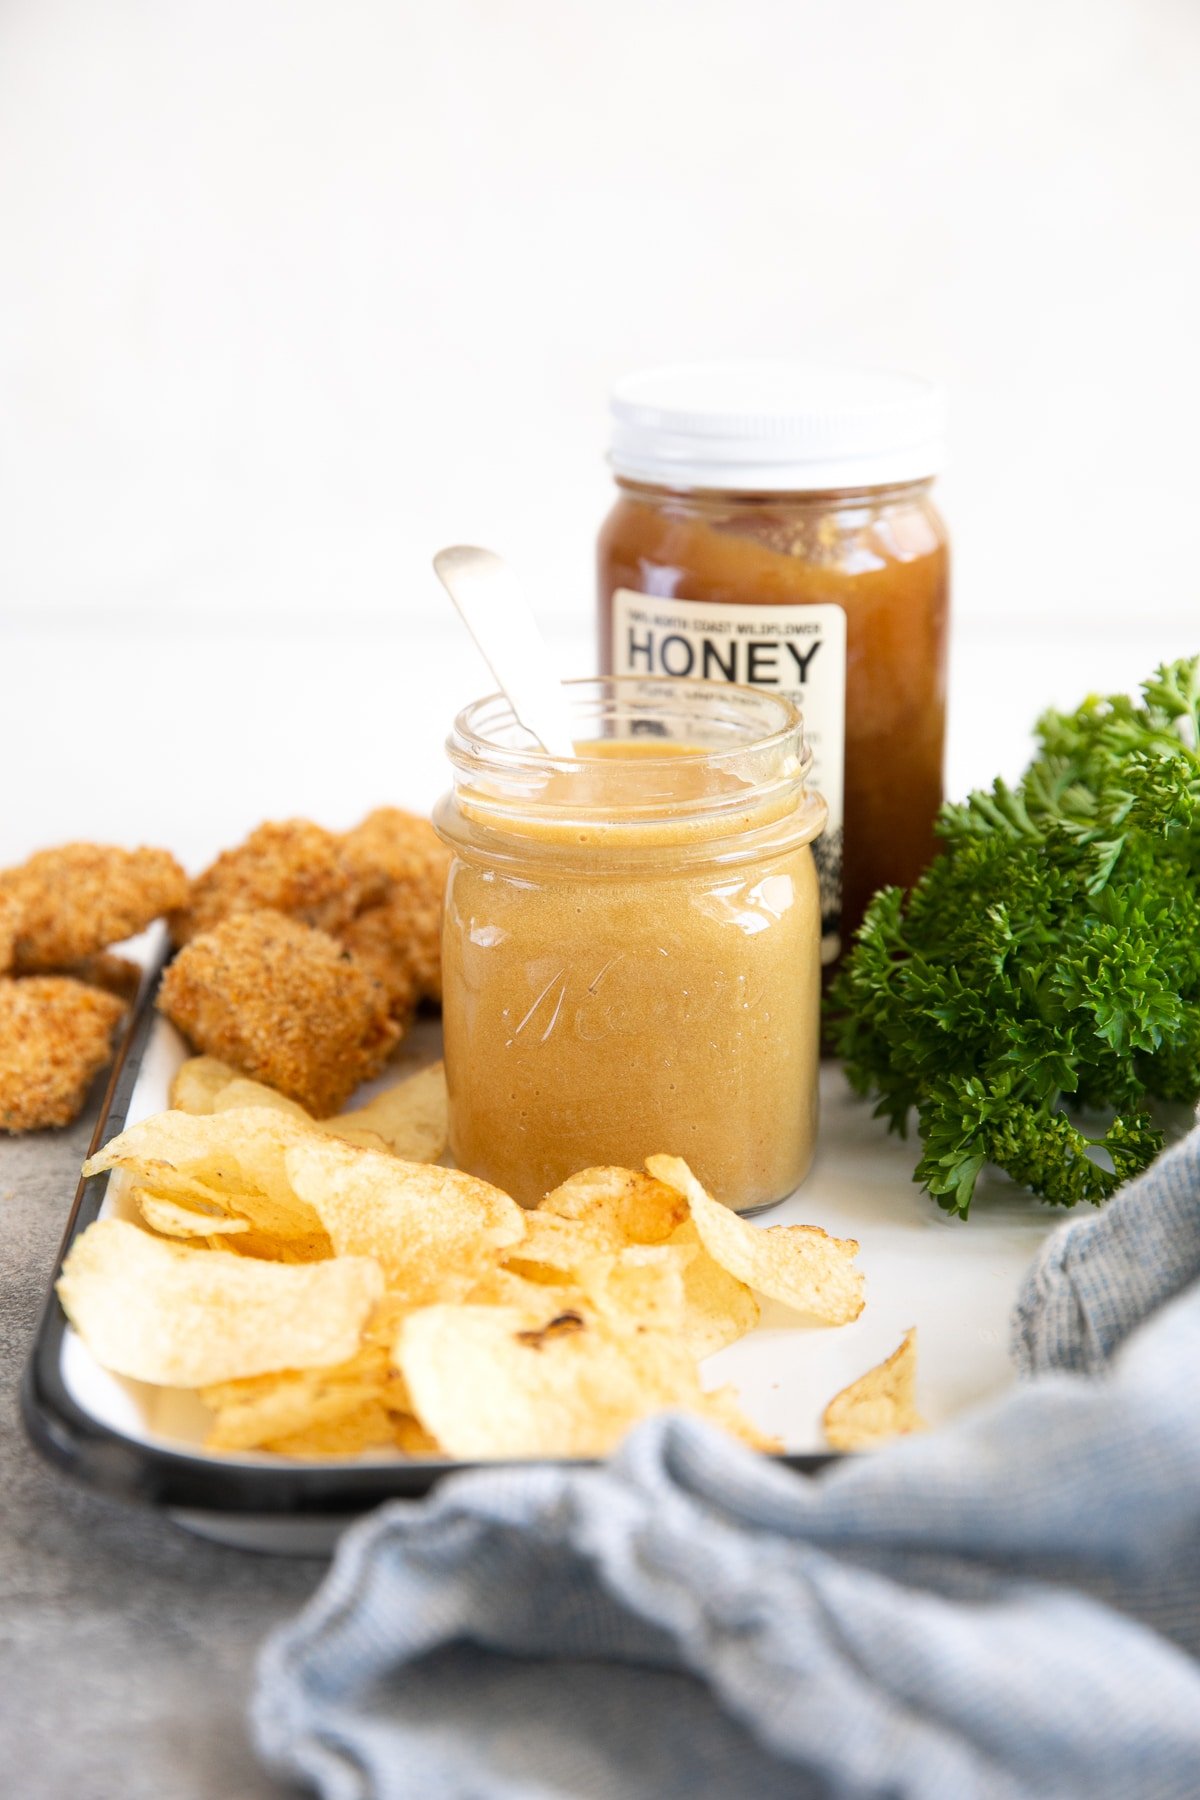 Honey mustard sauce on a white tray with potato chips, chicken nuggets, and a jar of honey in the background.